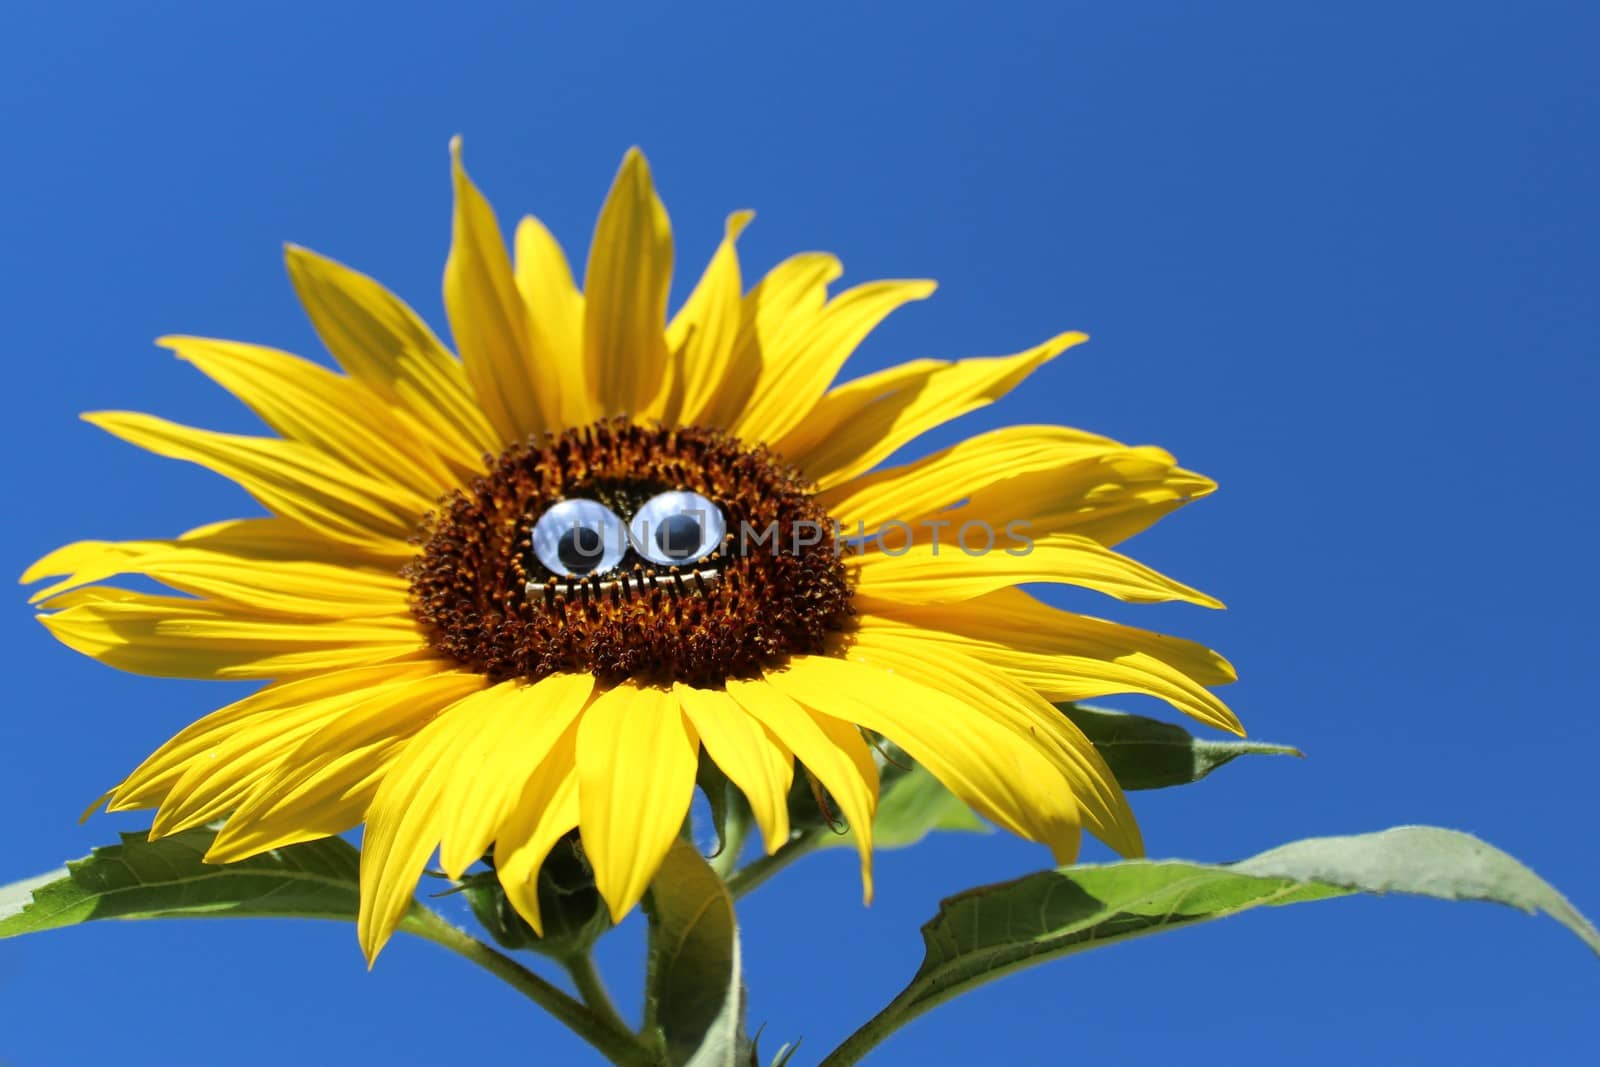 The picture shows a funny sunflower with a face.